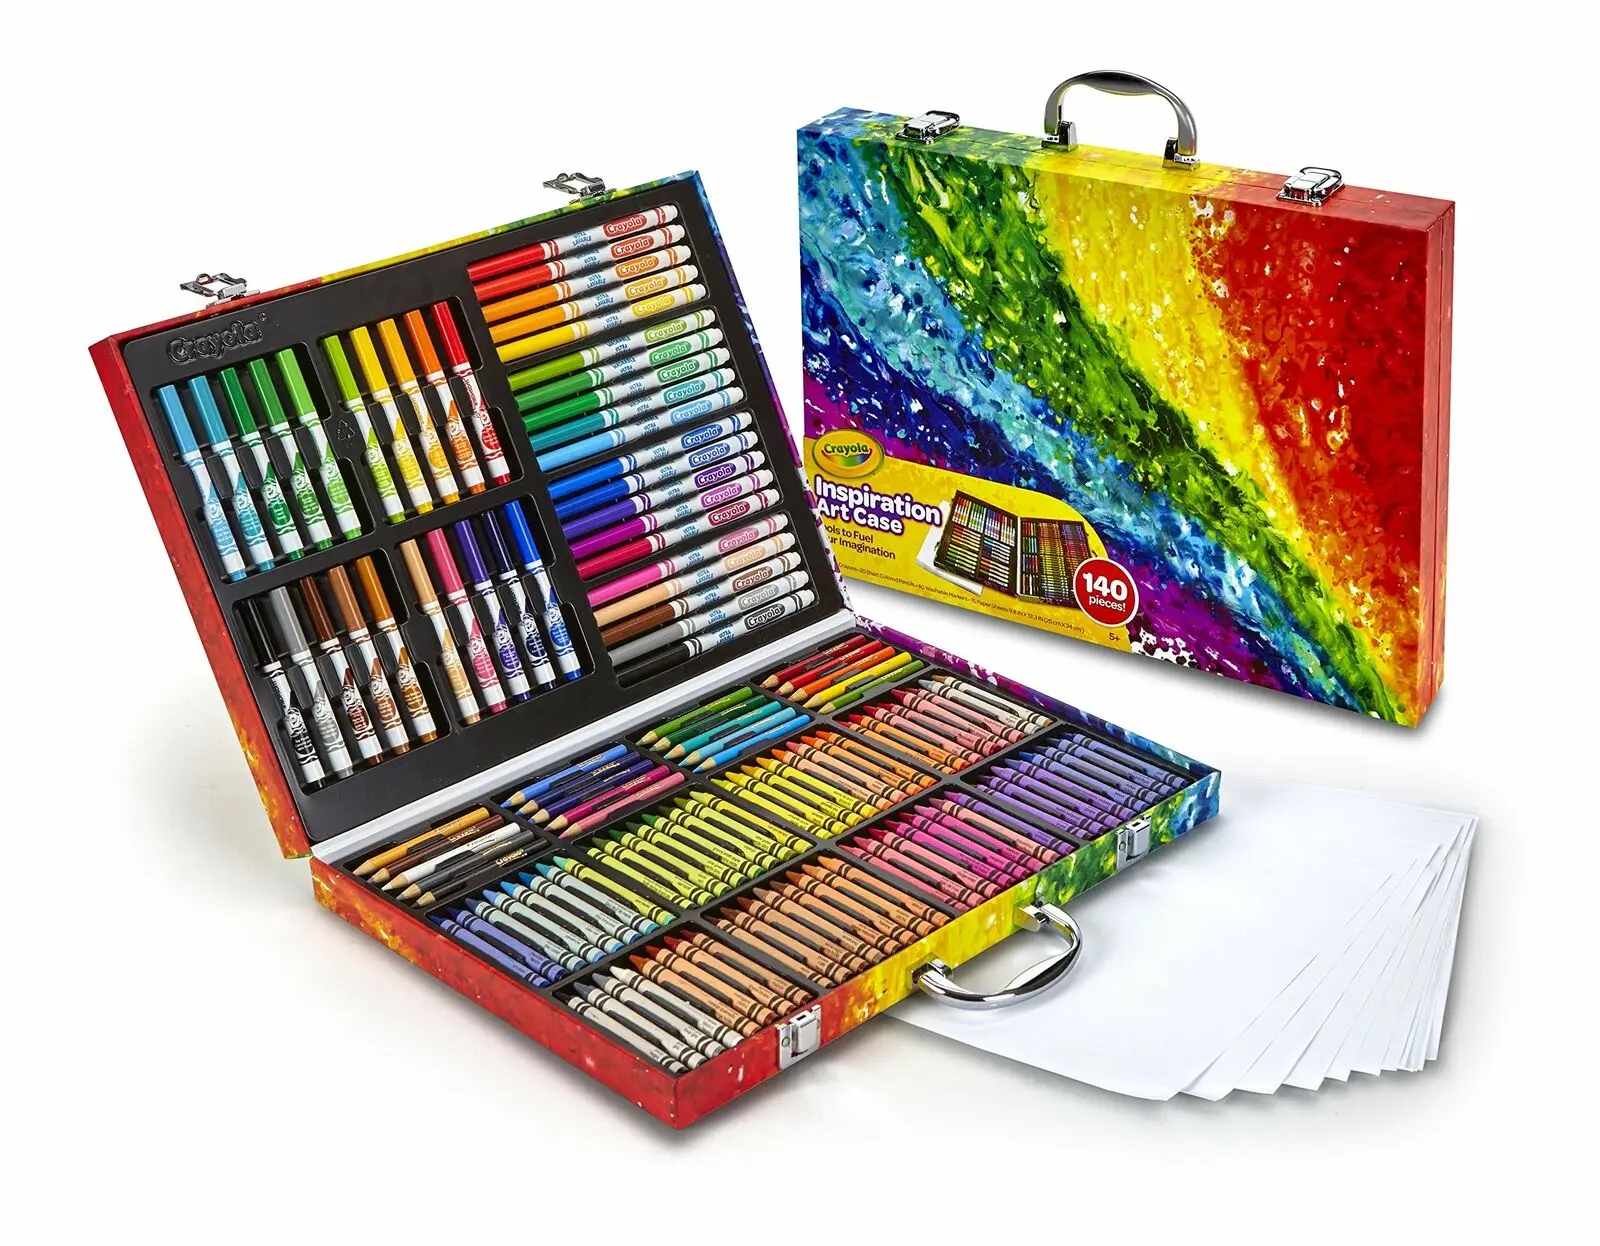 

Crayola 140 Count Art Set, Rainbow Inspiration Art Case, Gifts for Kids and Adults, Including Crayons, washable markers, pencils